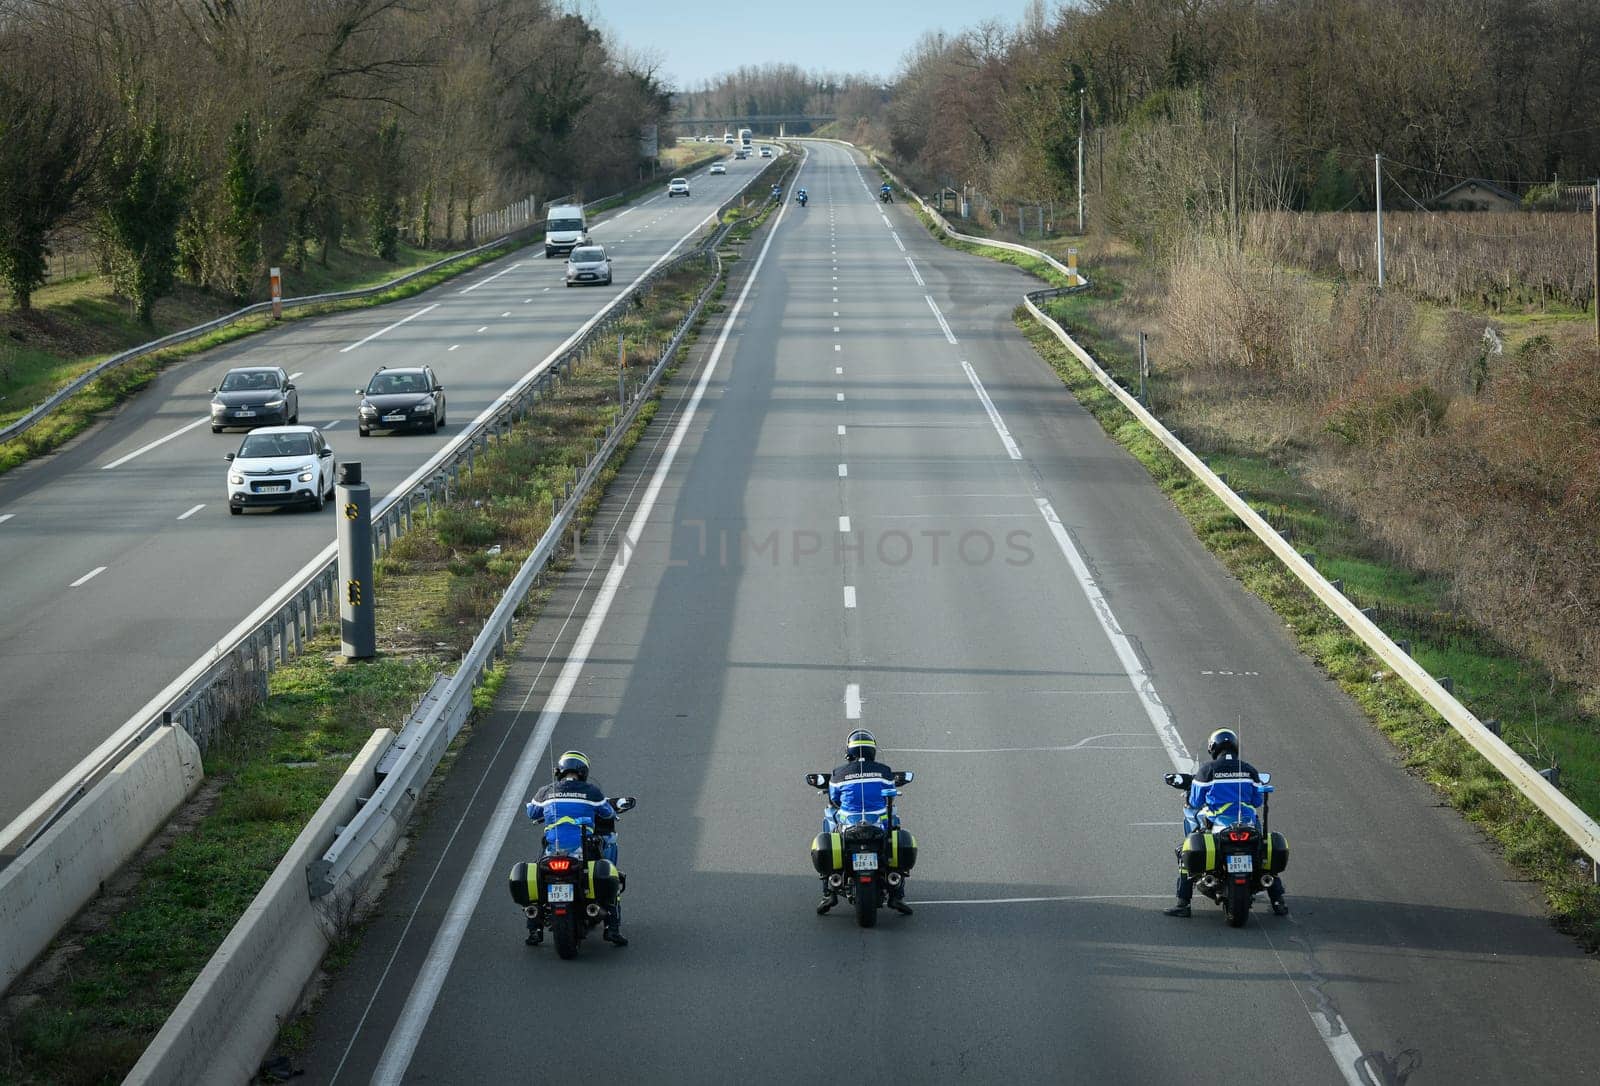 France, Bordeaux, 29 January 2024, Farmers' demonstration, mobile gendarmes on their motorbikes securing a demonstration by French farmers on a motorway in south-west France by FreeProd